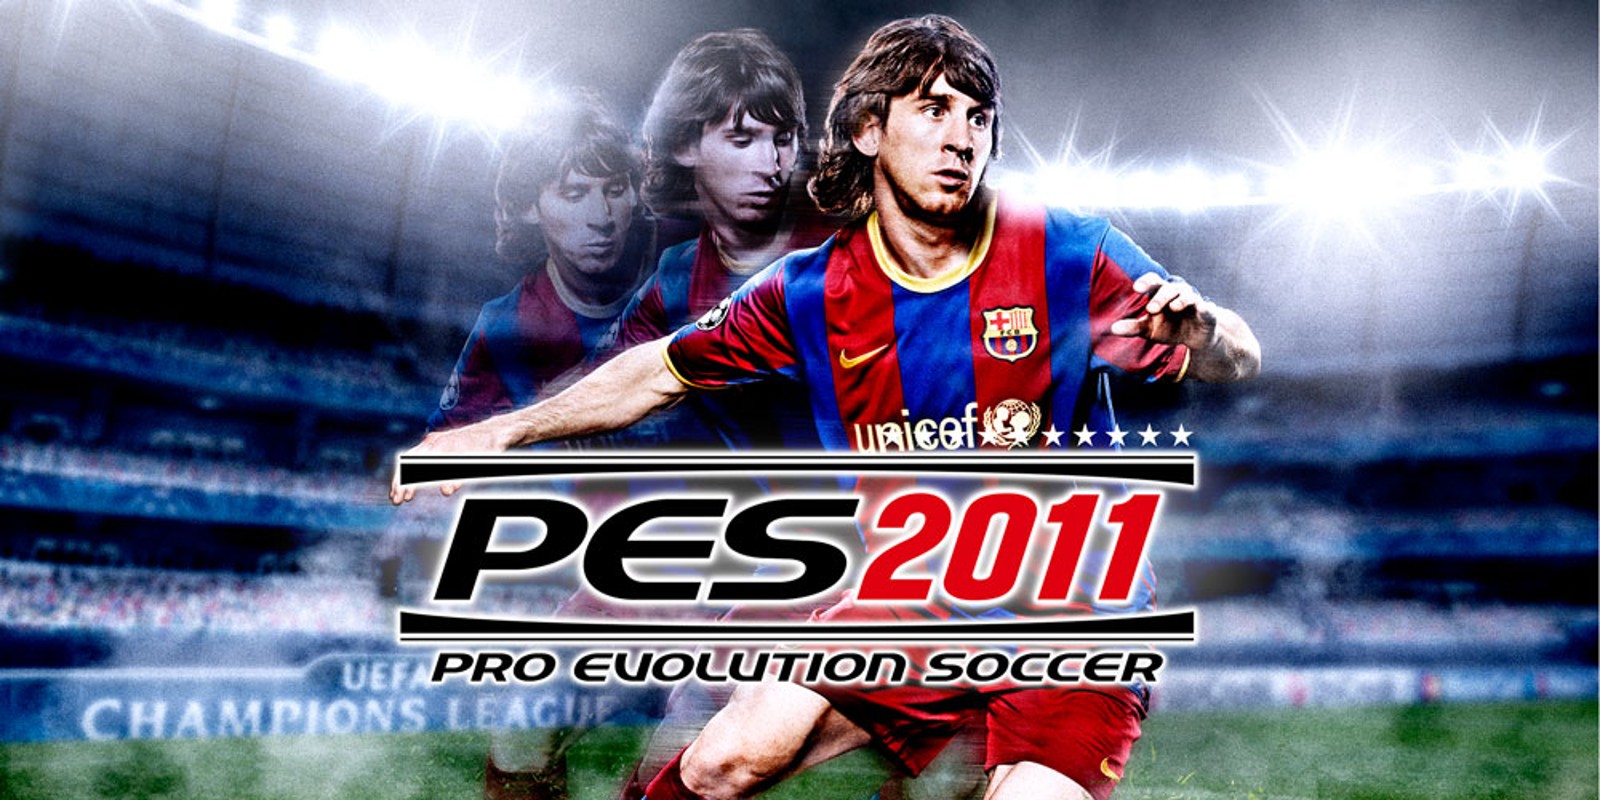 free download games for pc full version 2011 with crack